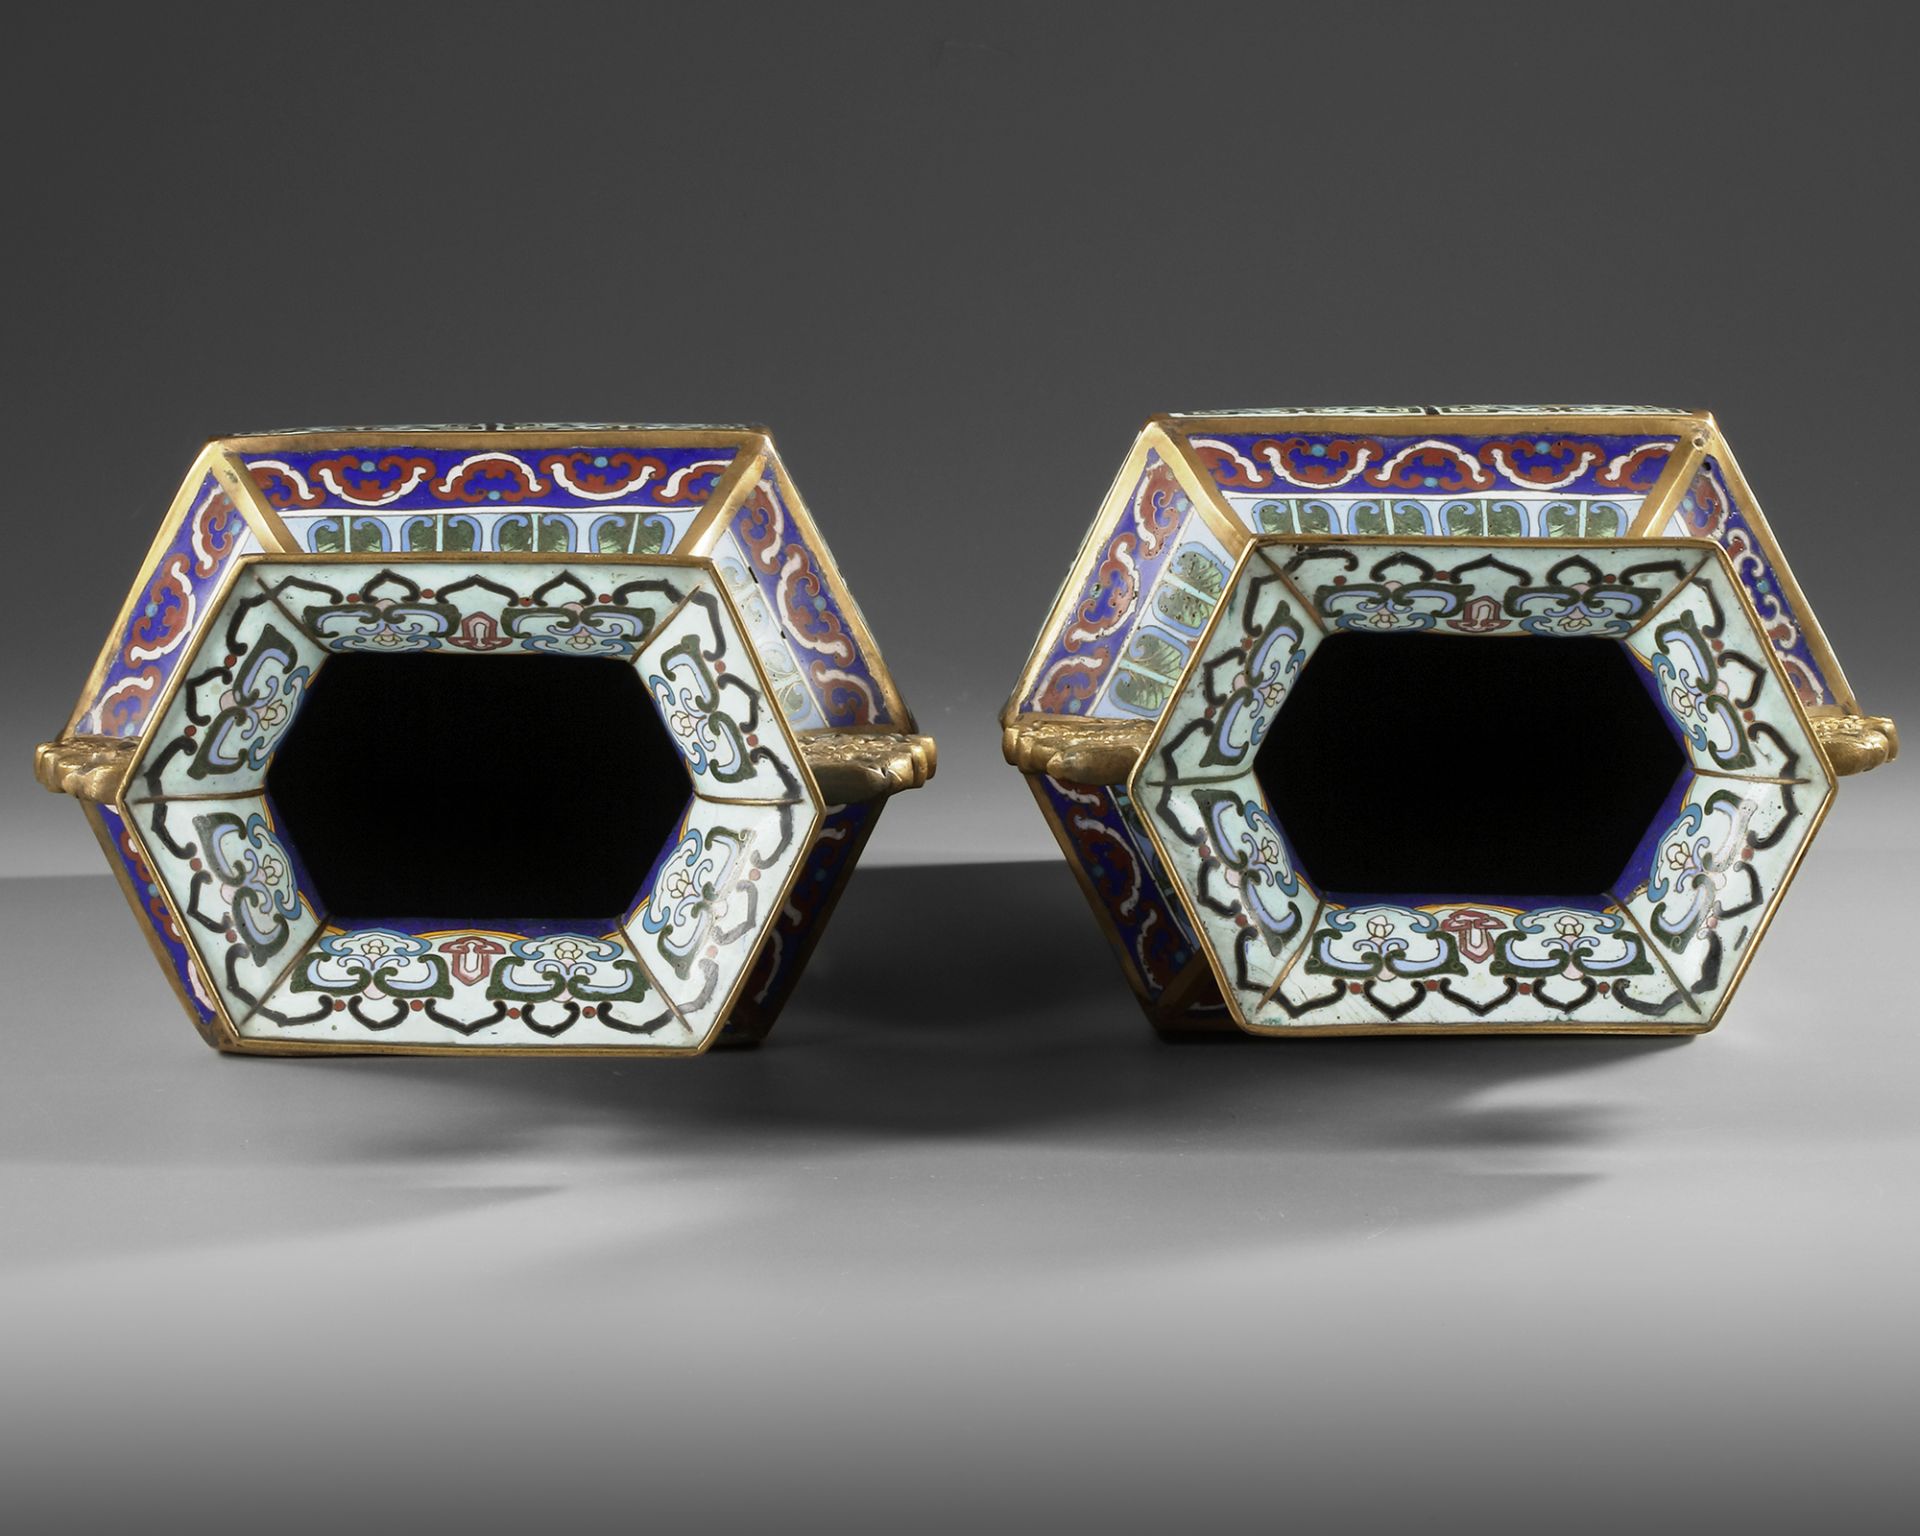 A PAIR OF CHINESE HEXAGONAL ENAMEL CLOISONNÉ VASES, 19TH-20TH CENTURY - Image 3 of 4